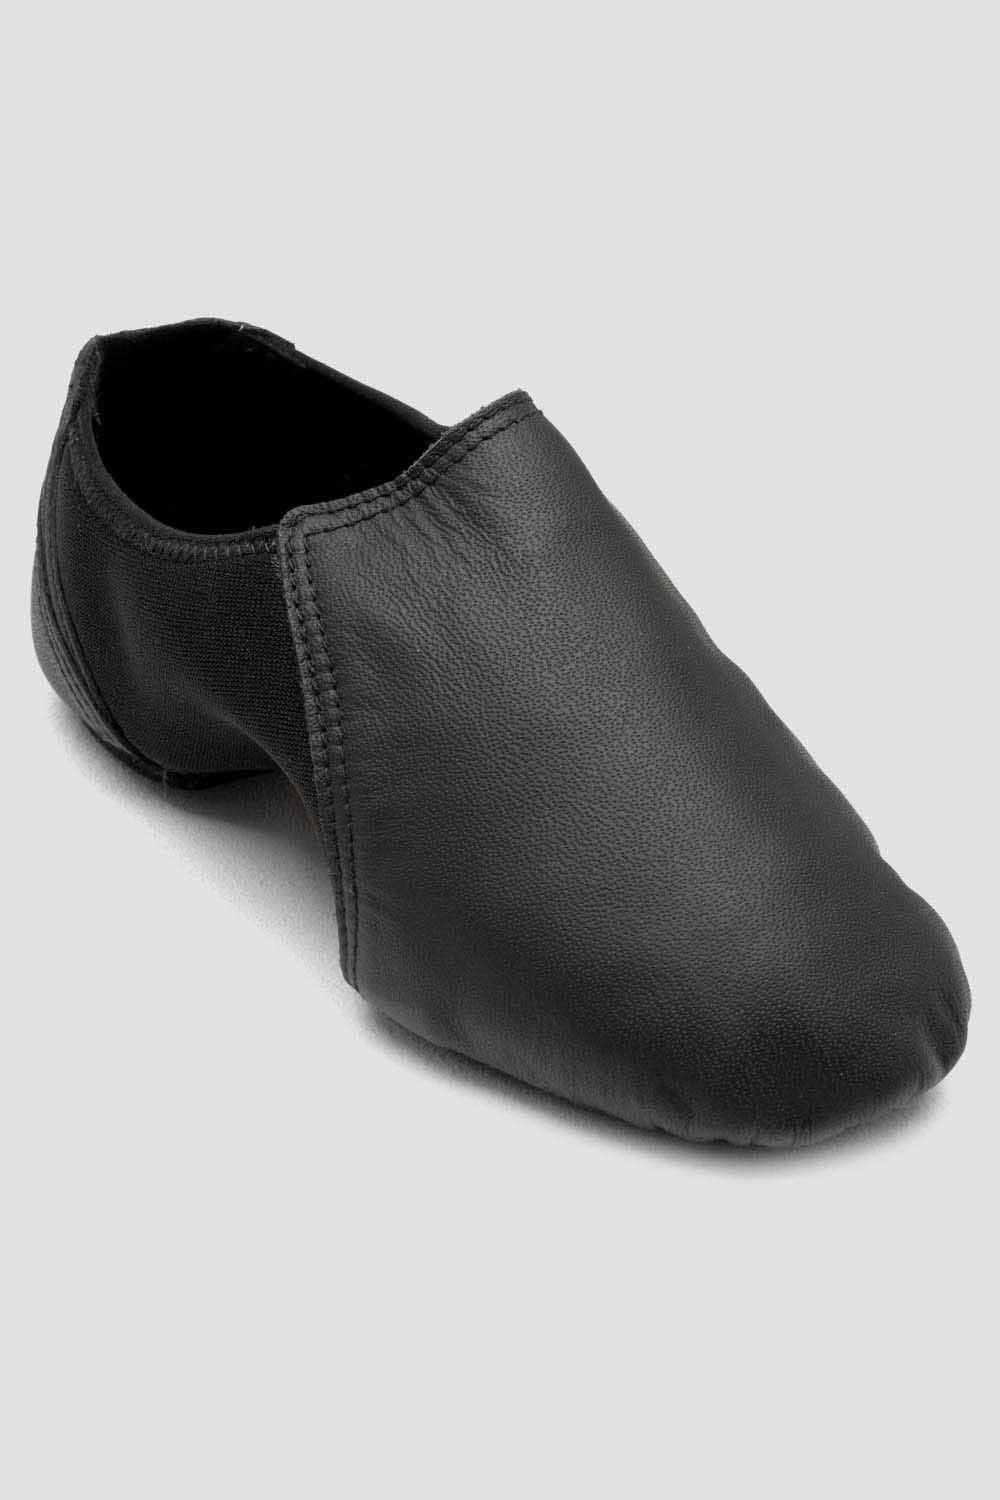 Childrens Spark Leather & Neoprene Jazz Shoes